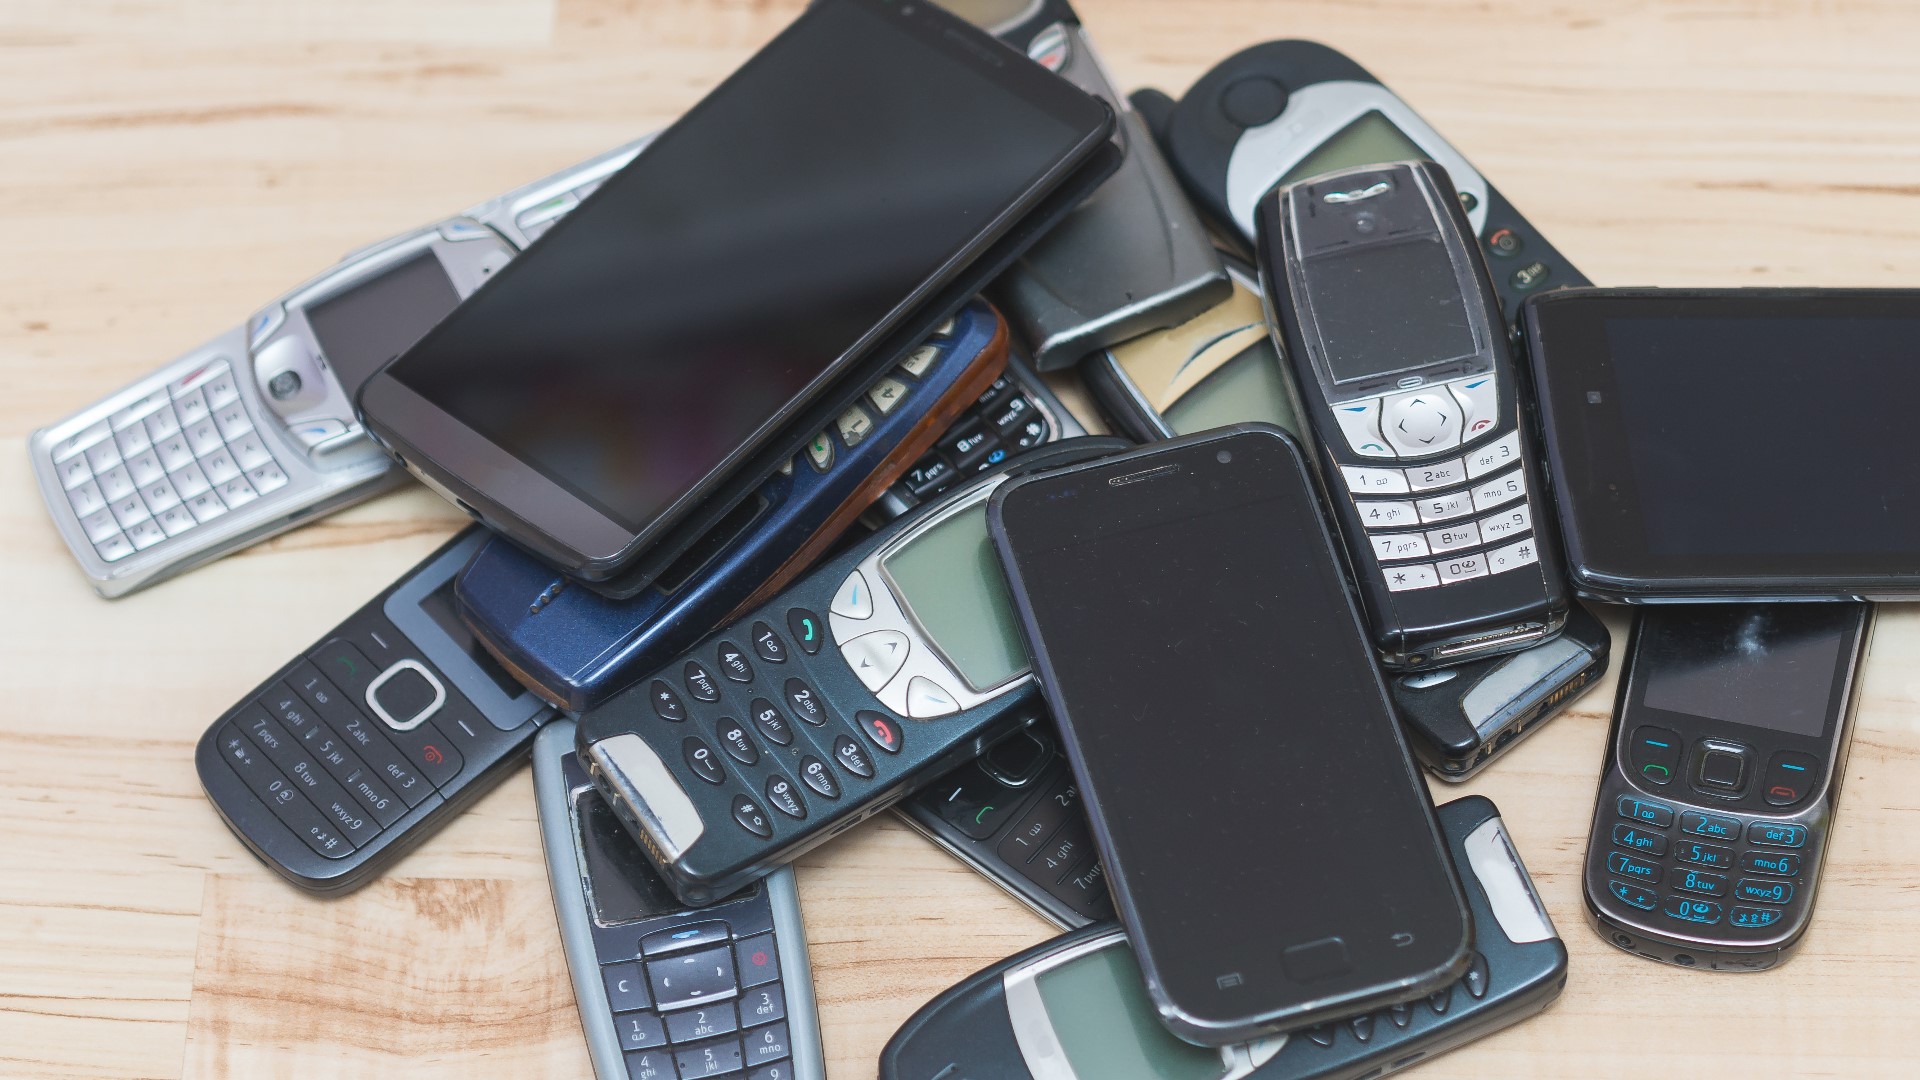 There's a good chance you or someone else in your home received a new electronic device for the holidays. You can easily recycle any old devices you have at home.